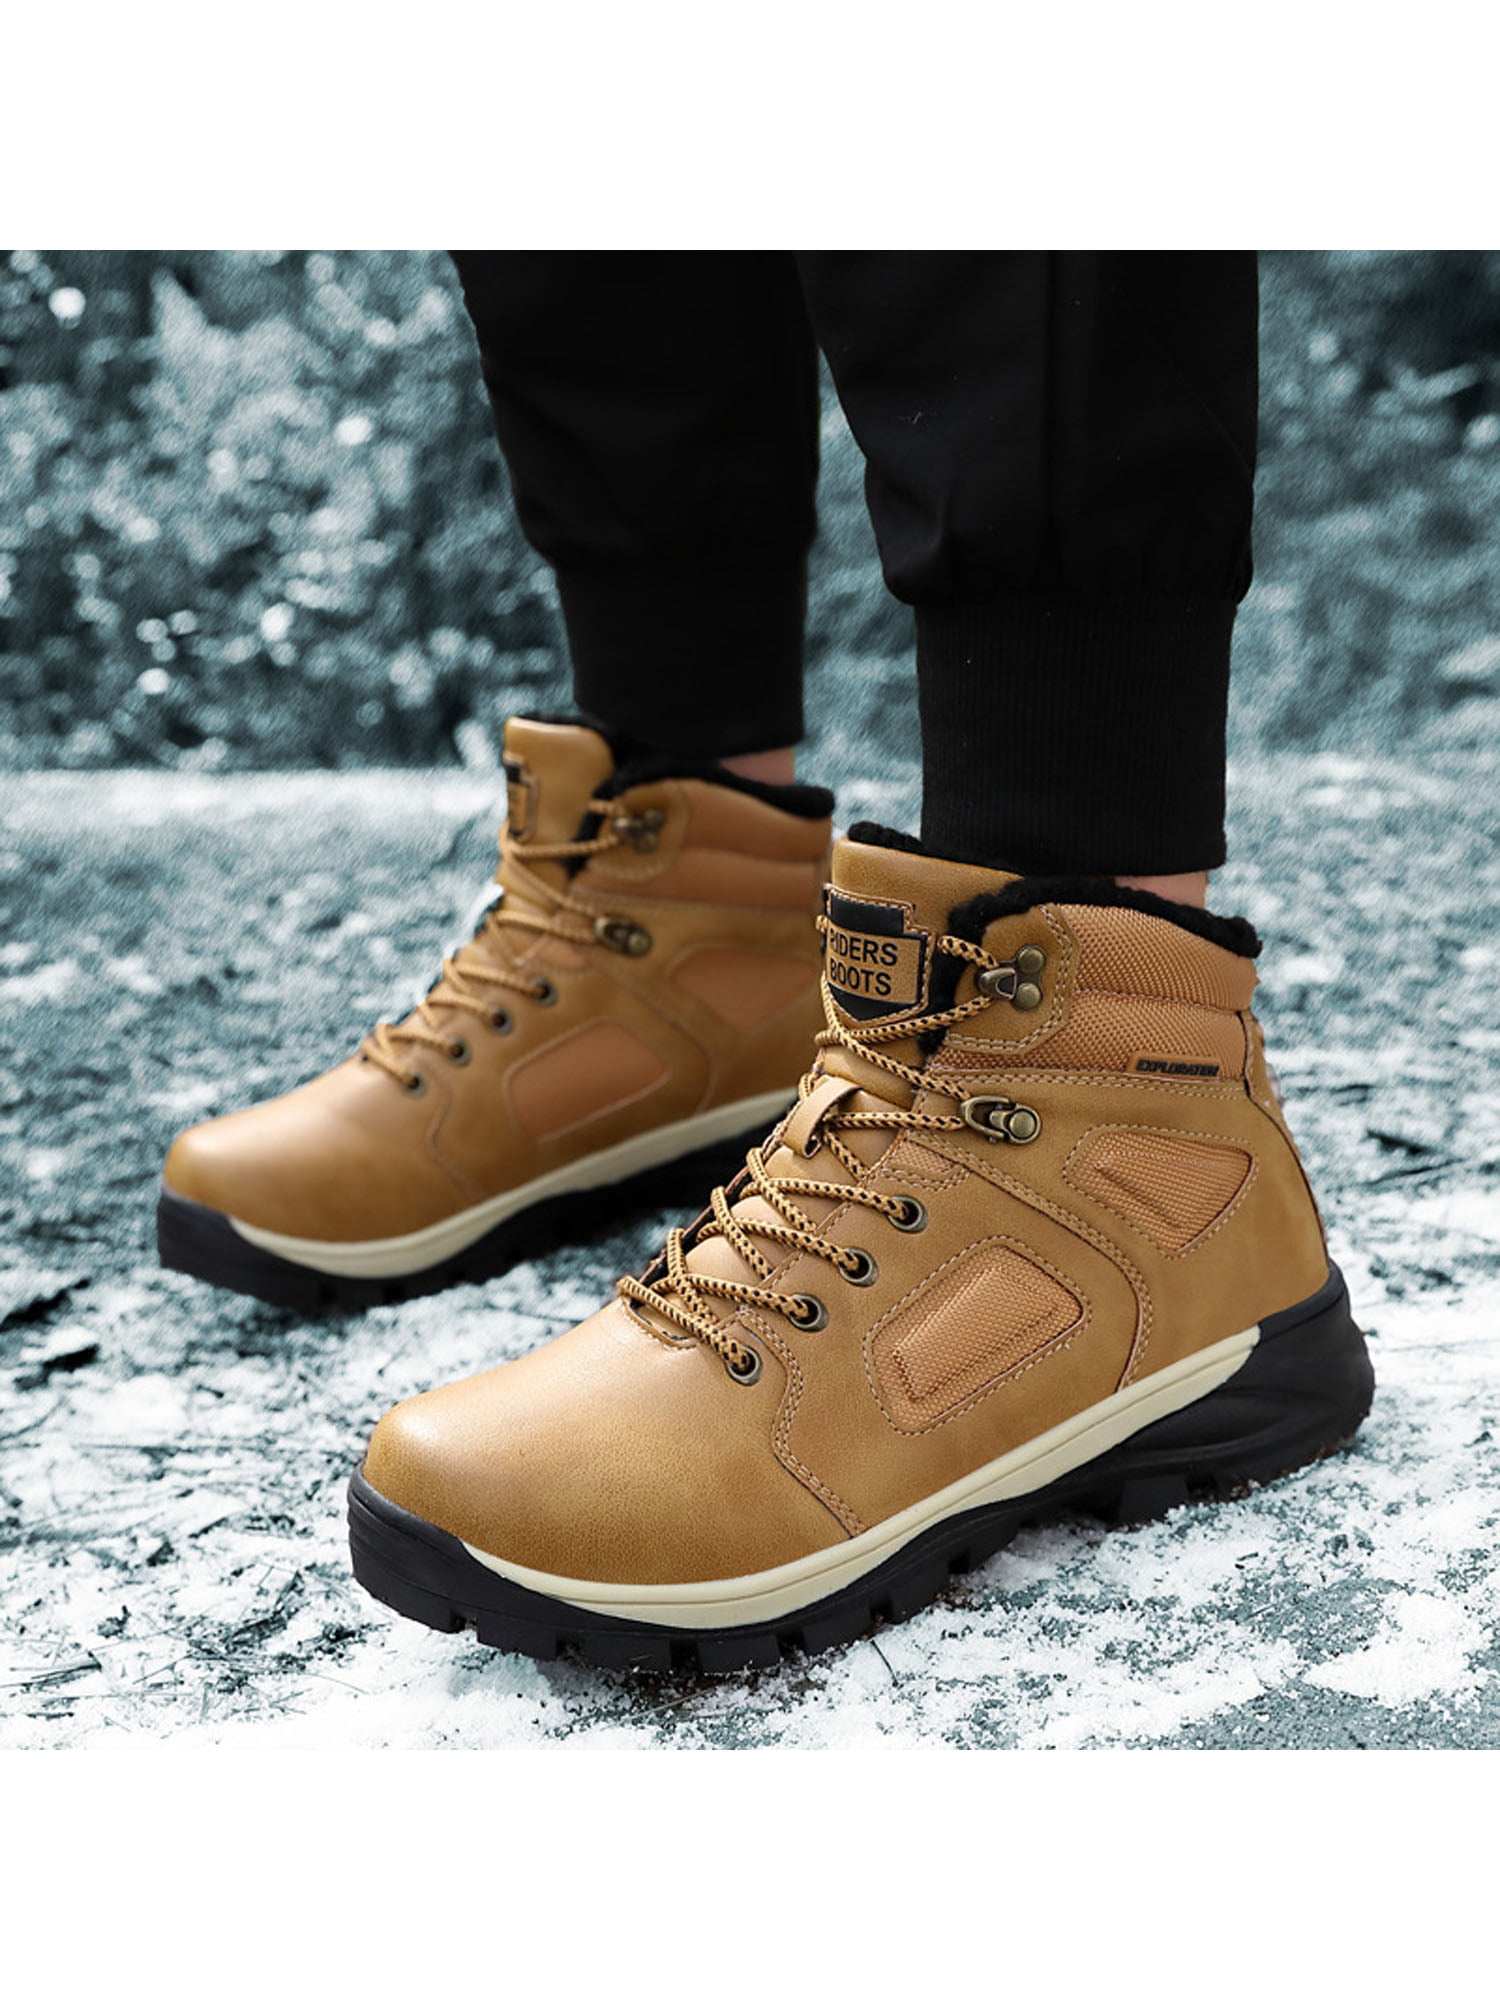 Men's Waterproof Leather Winter Work Hiking Boots Outdoor Warm Fur Lined Shoes